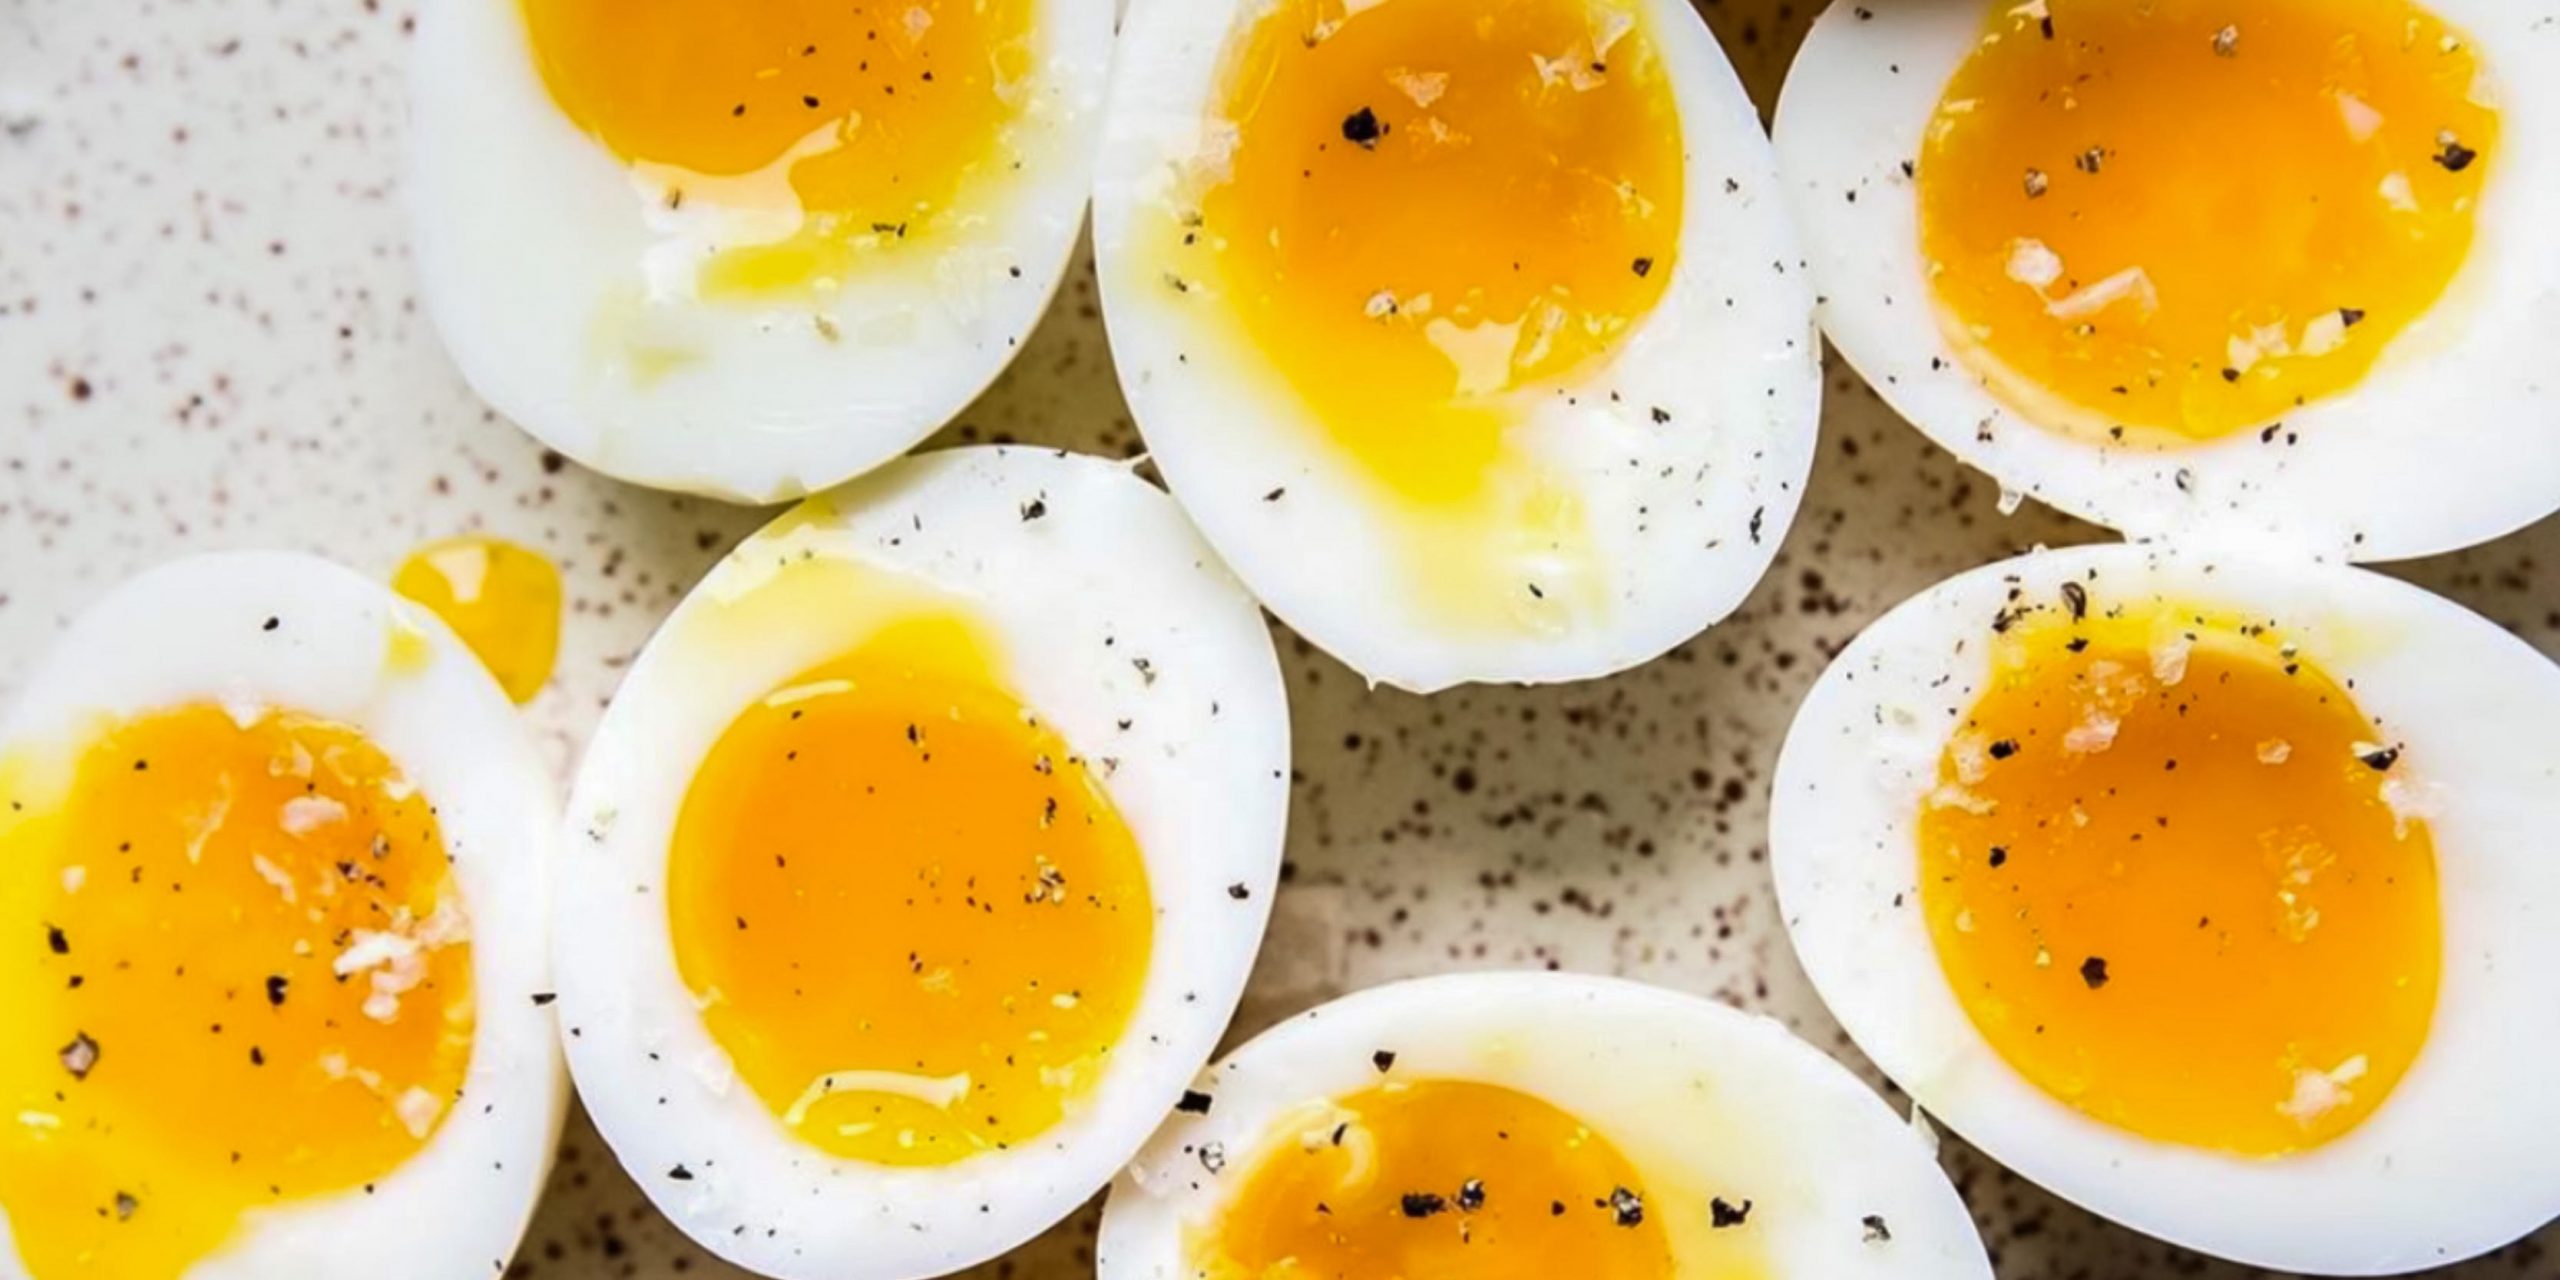 Several medium-boiled eggs sliced open with yolks oozing